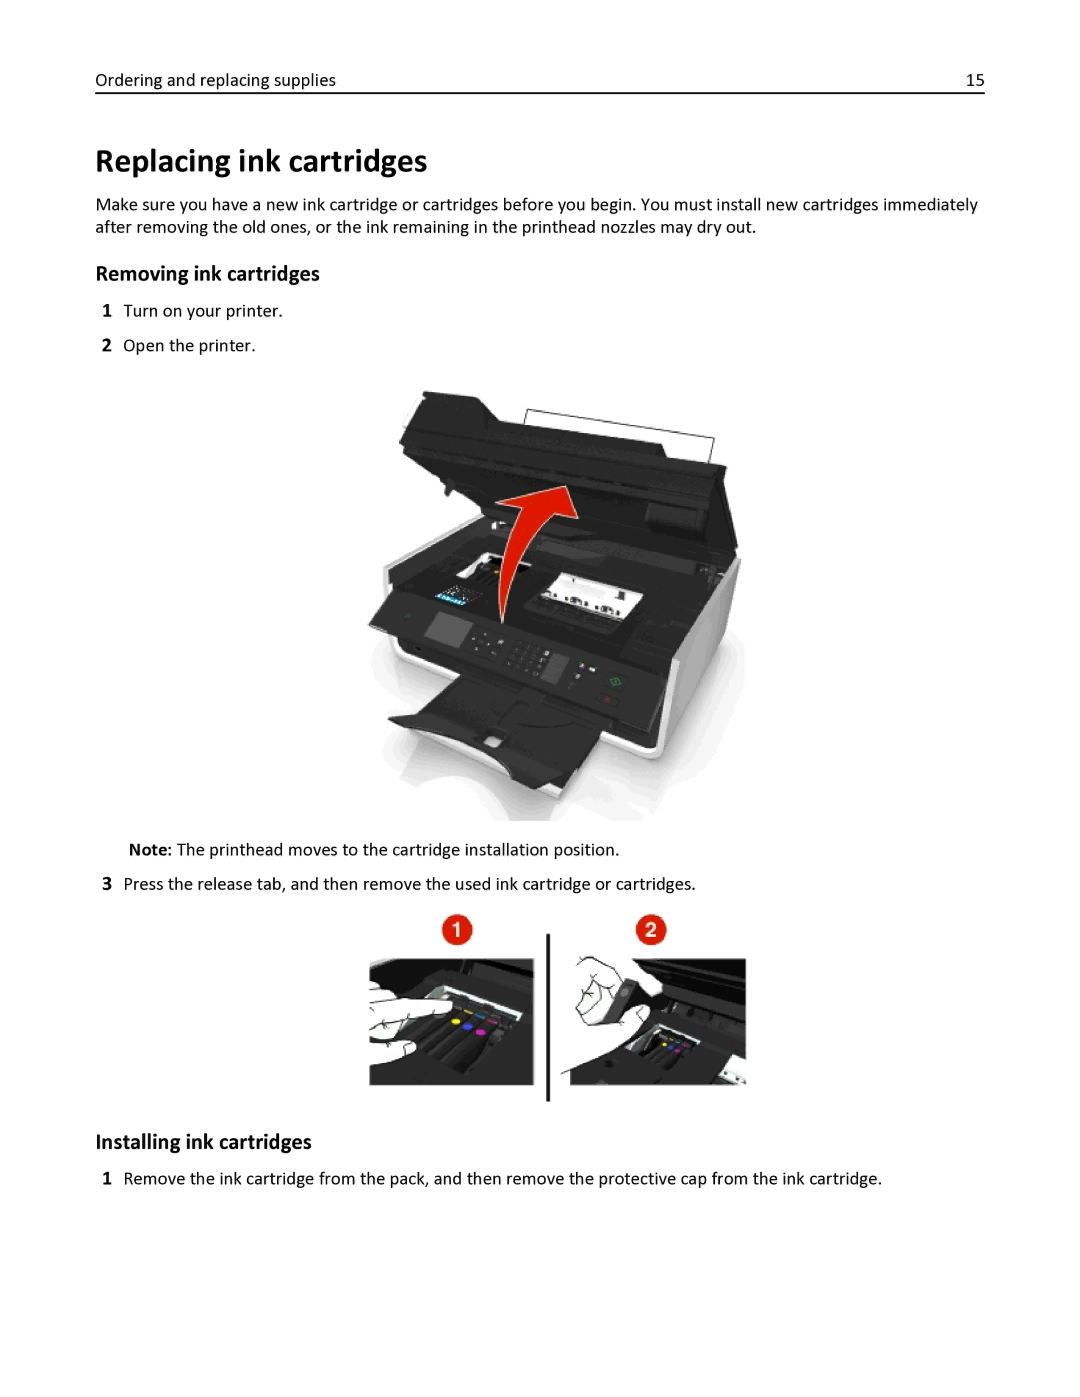 Dell V525W manual Replacing ink cartridges, Removing ink cartridges, Installing ink cartridges 